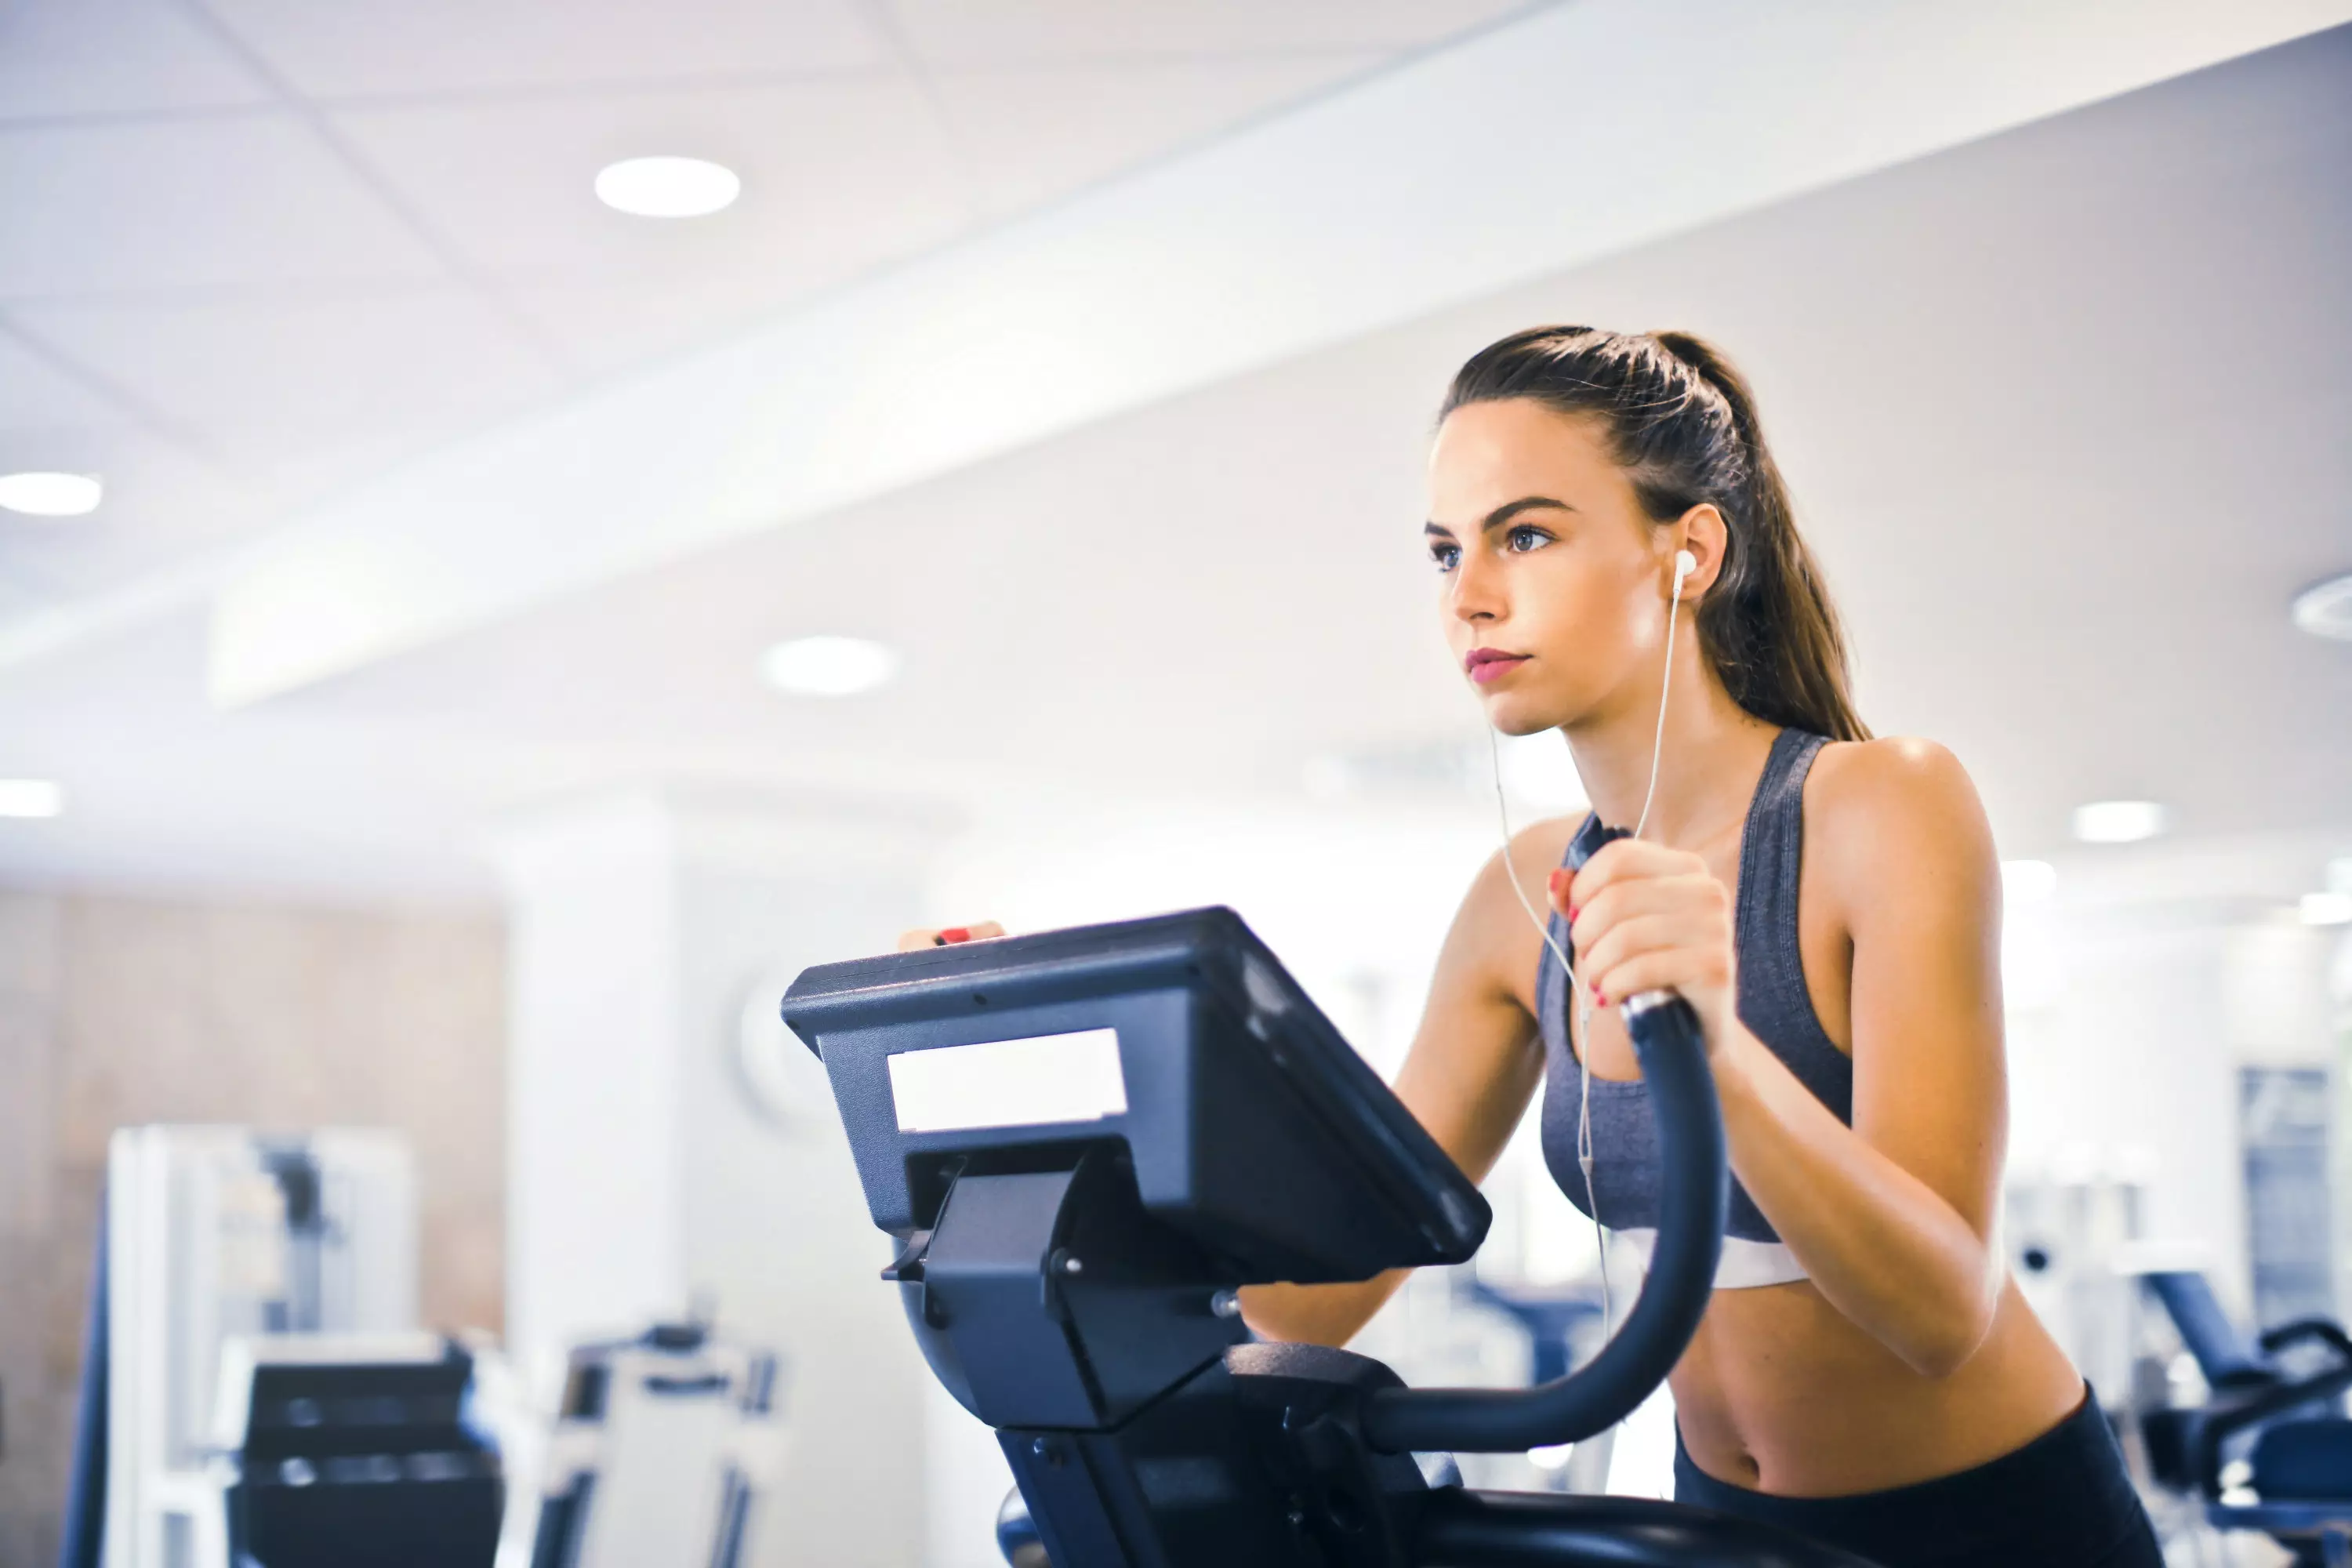 Treadmills aren't the best way to go about losing weight, apparently.